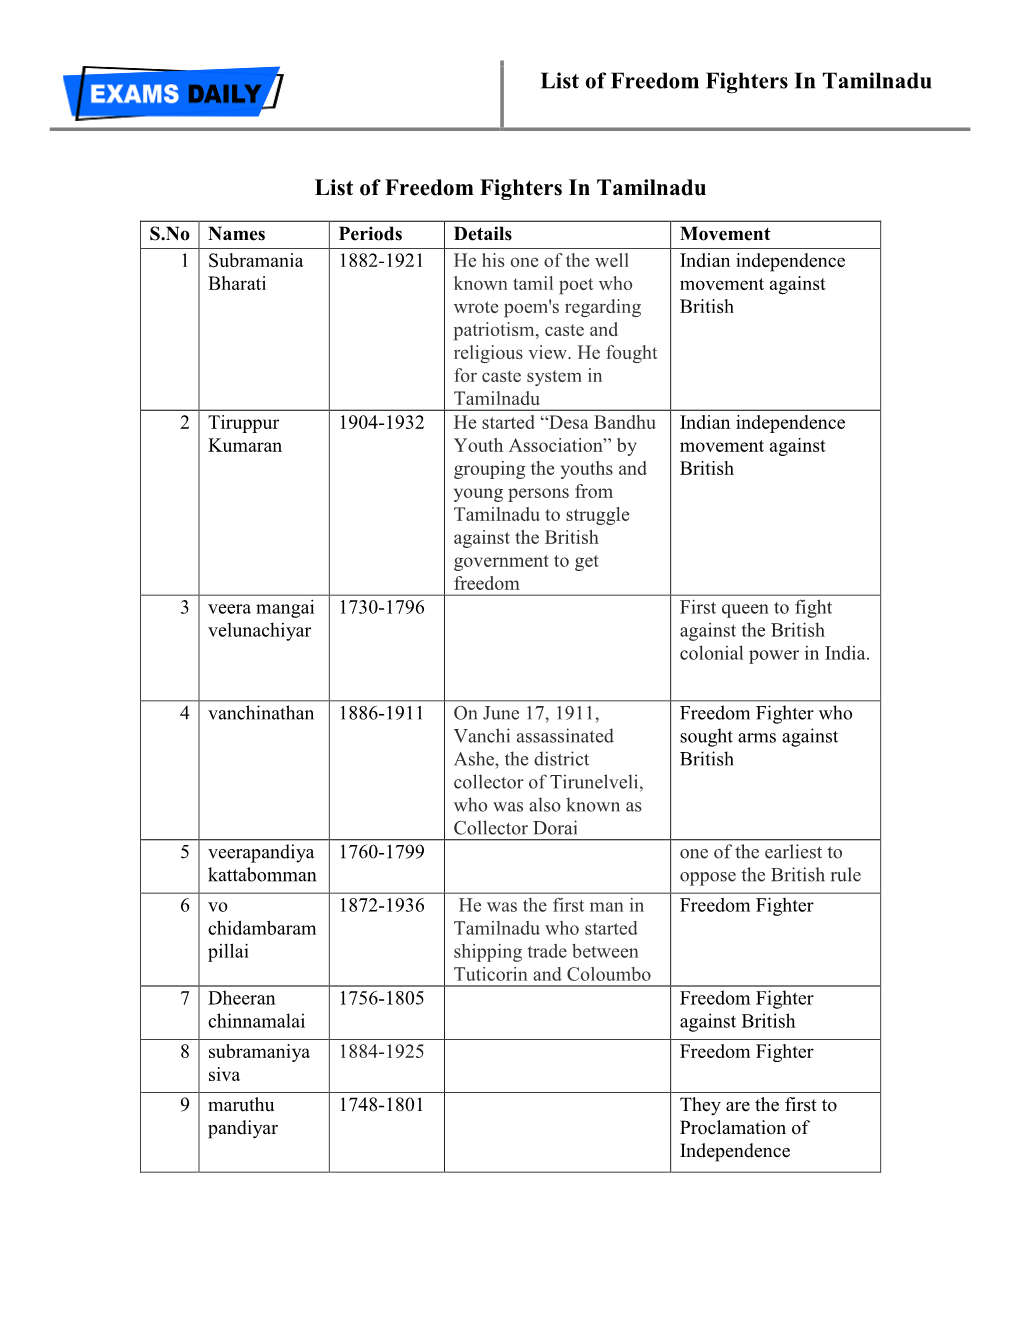 List of Freedom Fighters in Tamilnadu List of Freedom